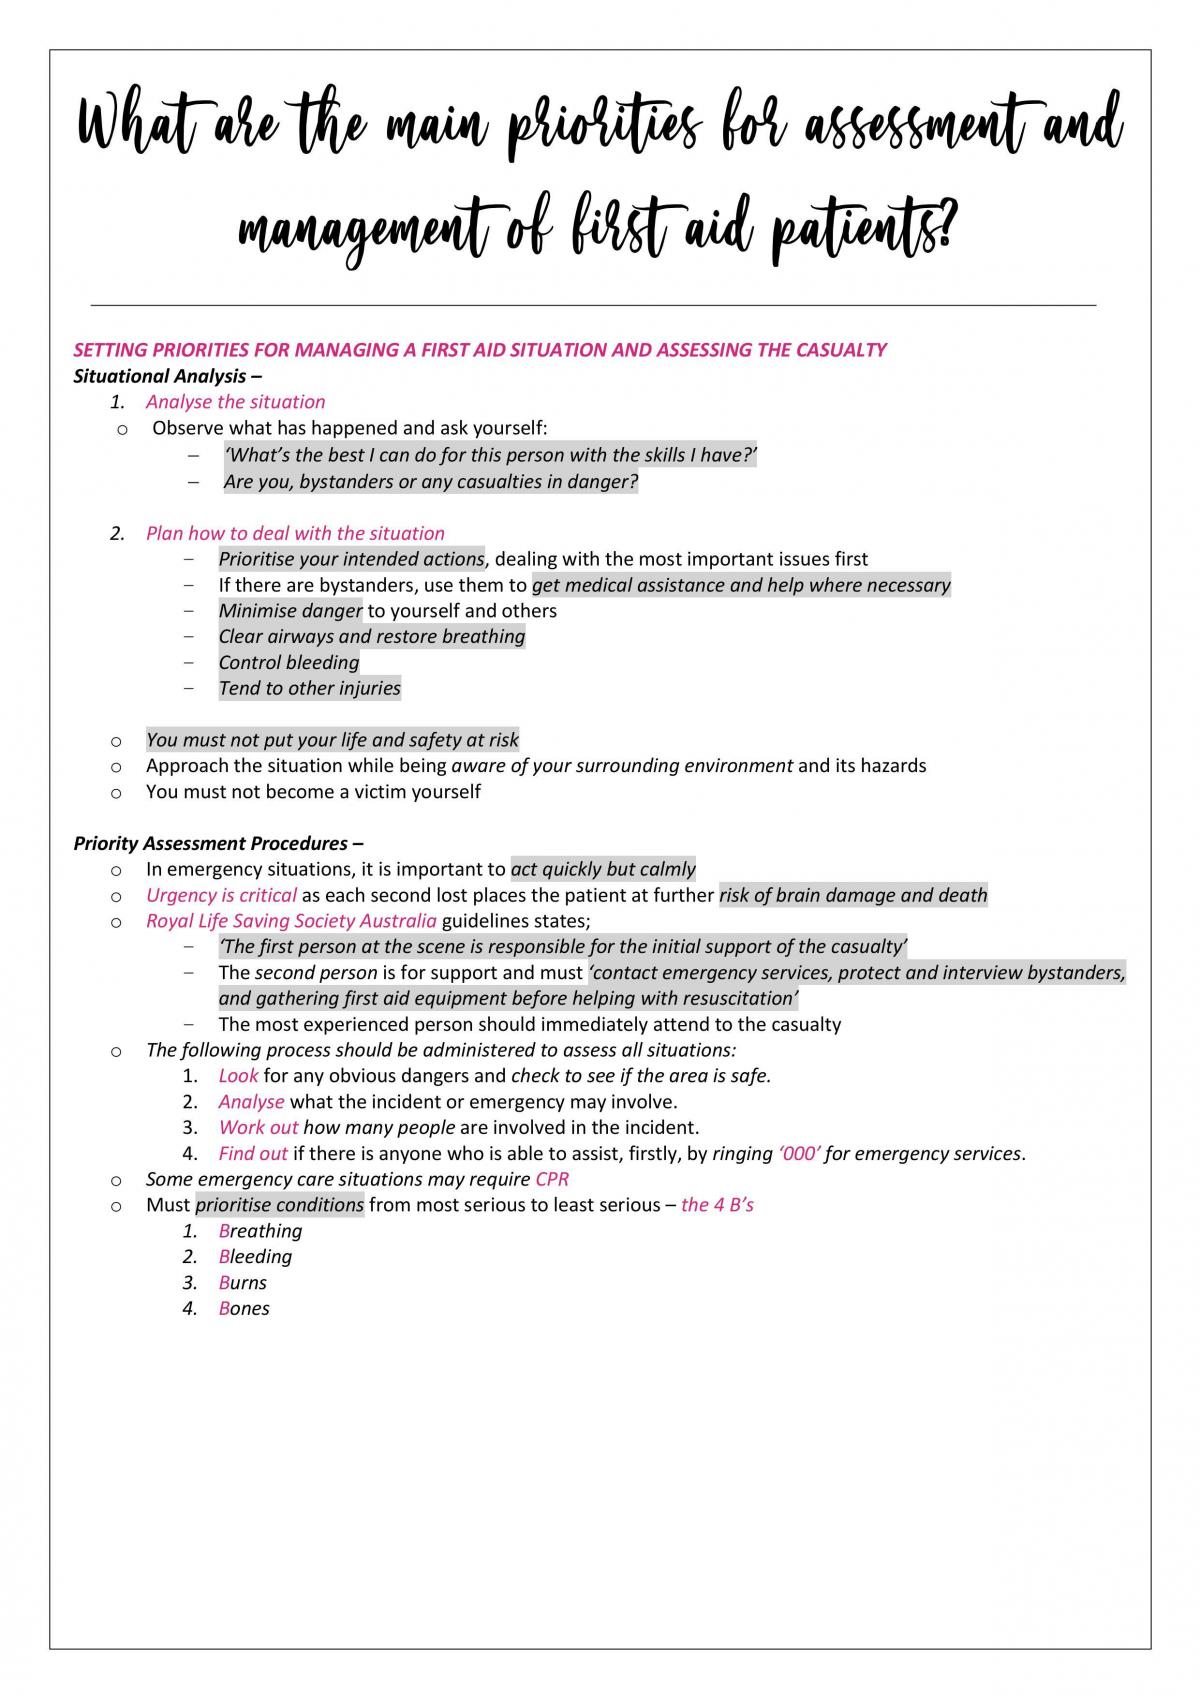 PDHPE - First Aid Study Notes - Page 2